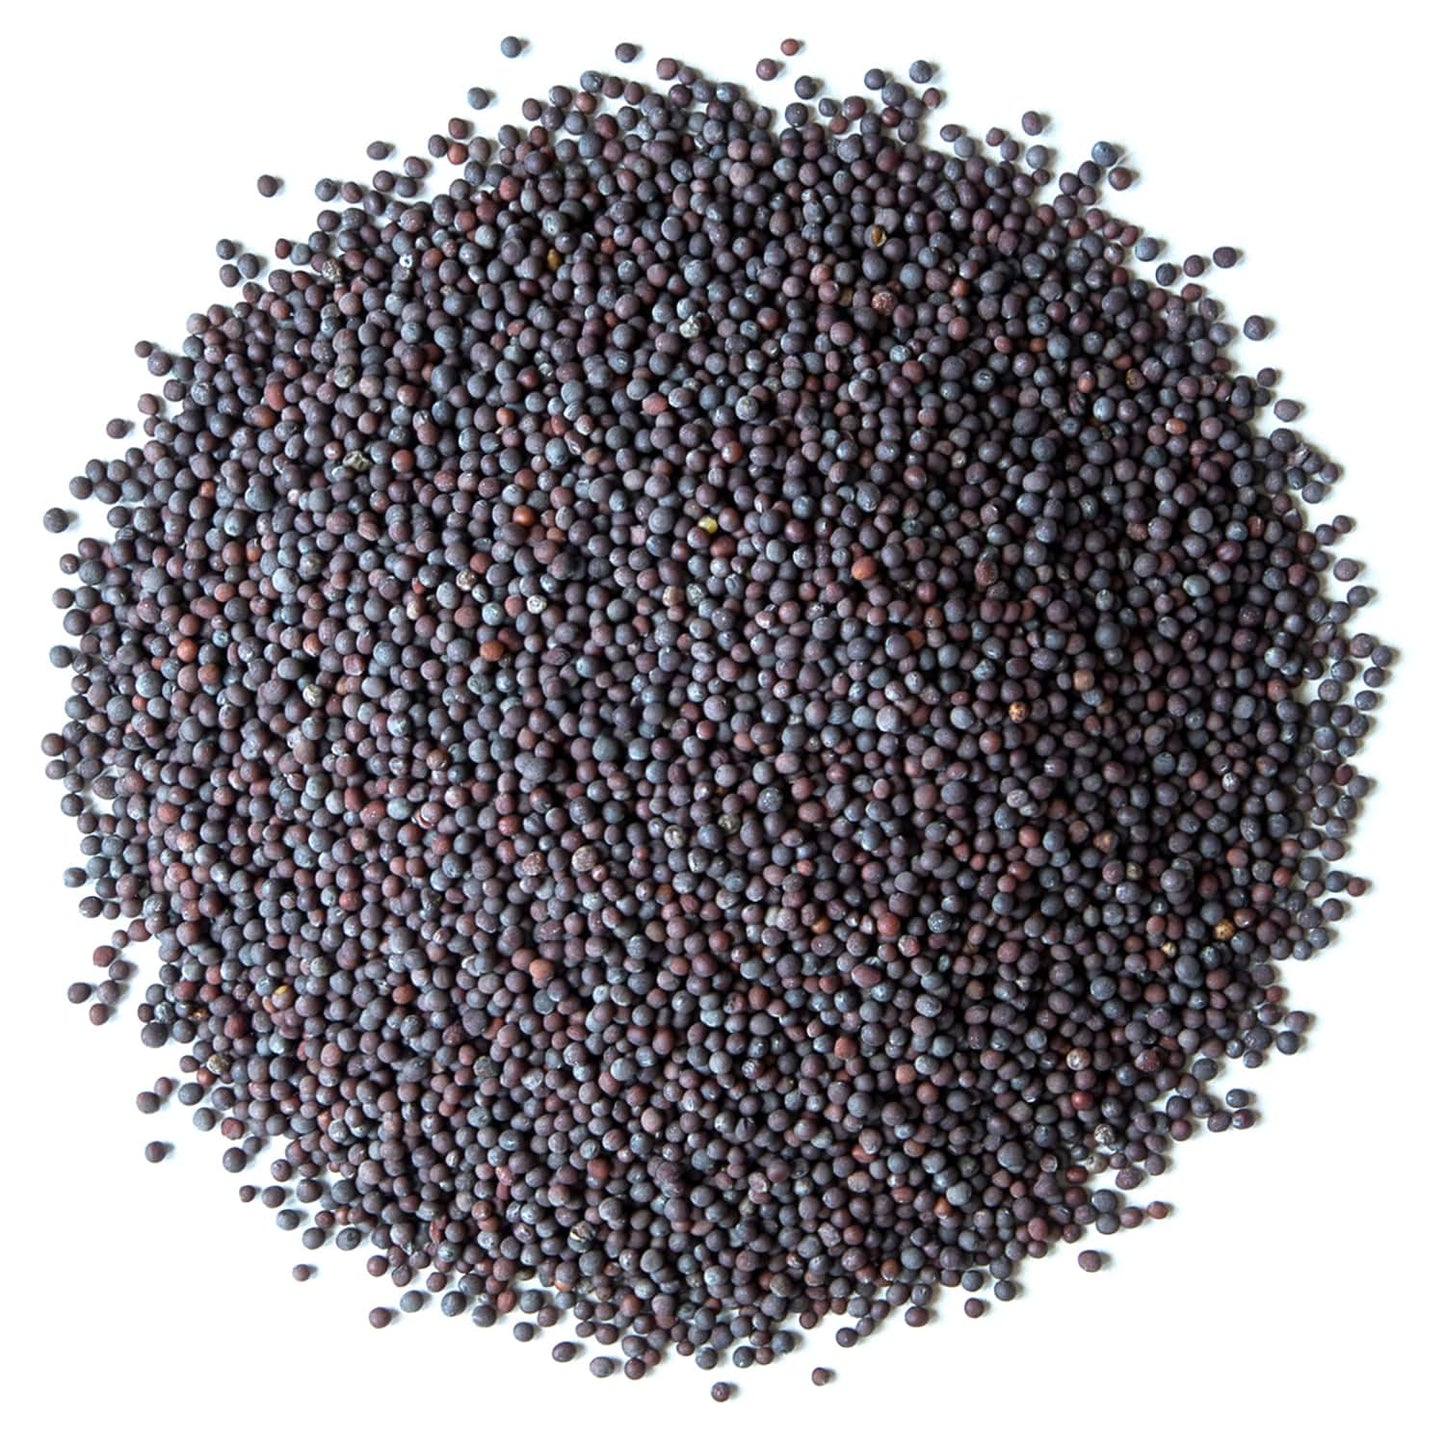 Organic Black Mustard Seeds - Whole, Non-GMO, Hot Spice, Non-Irradiated, Vegan, Kosher, Dry, Bulk, Great for Cooking - by Food to LIve